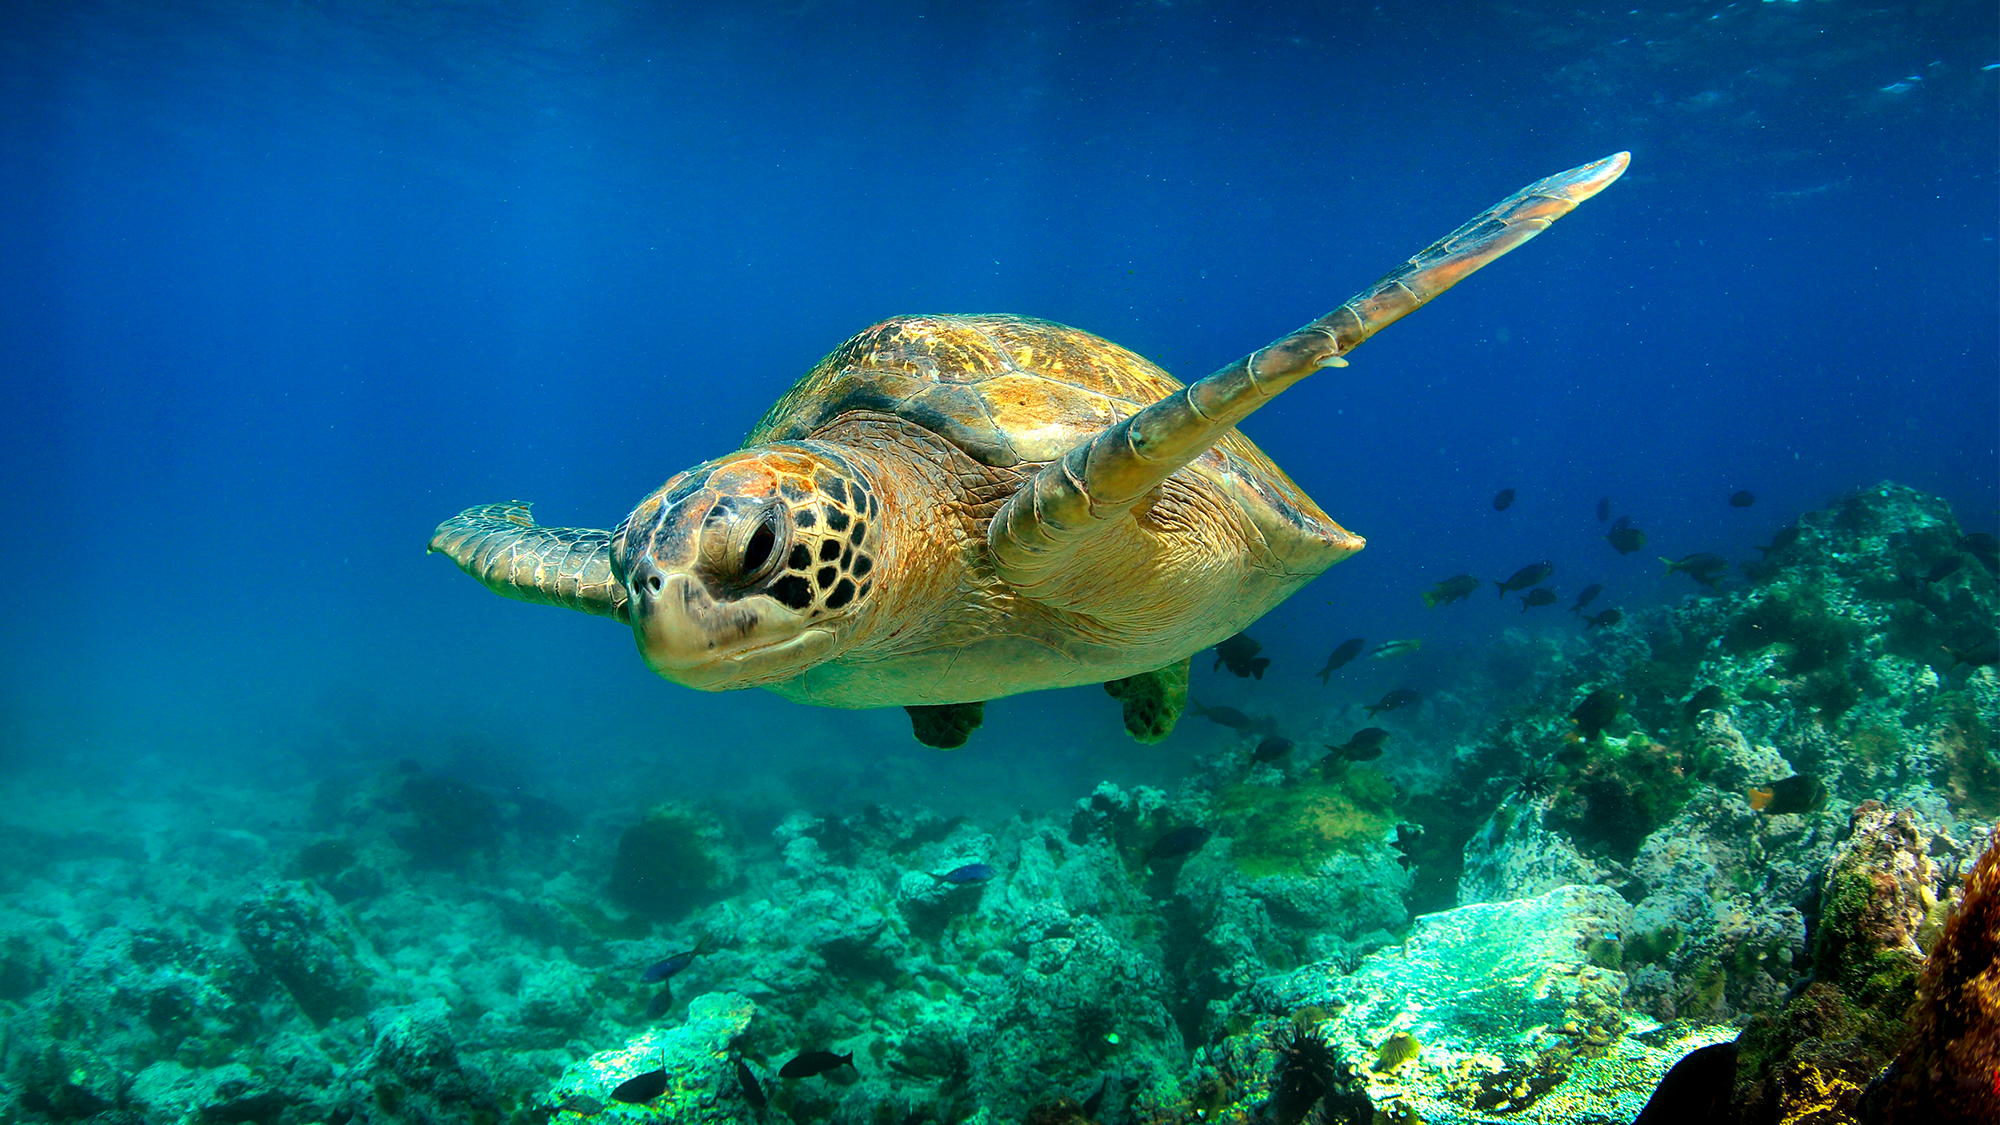 A green sea turtle swims in the ocean.